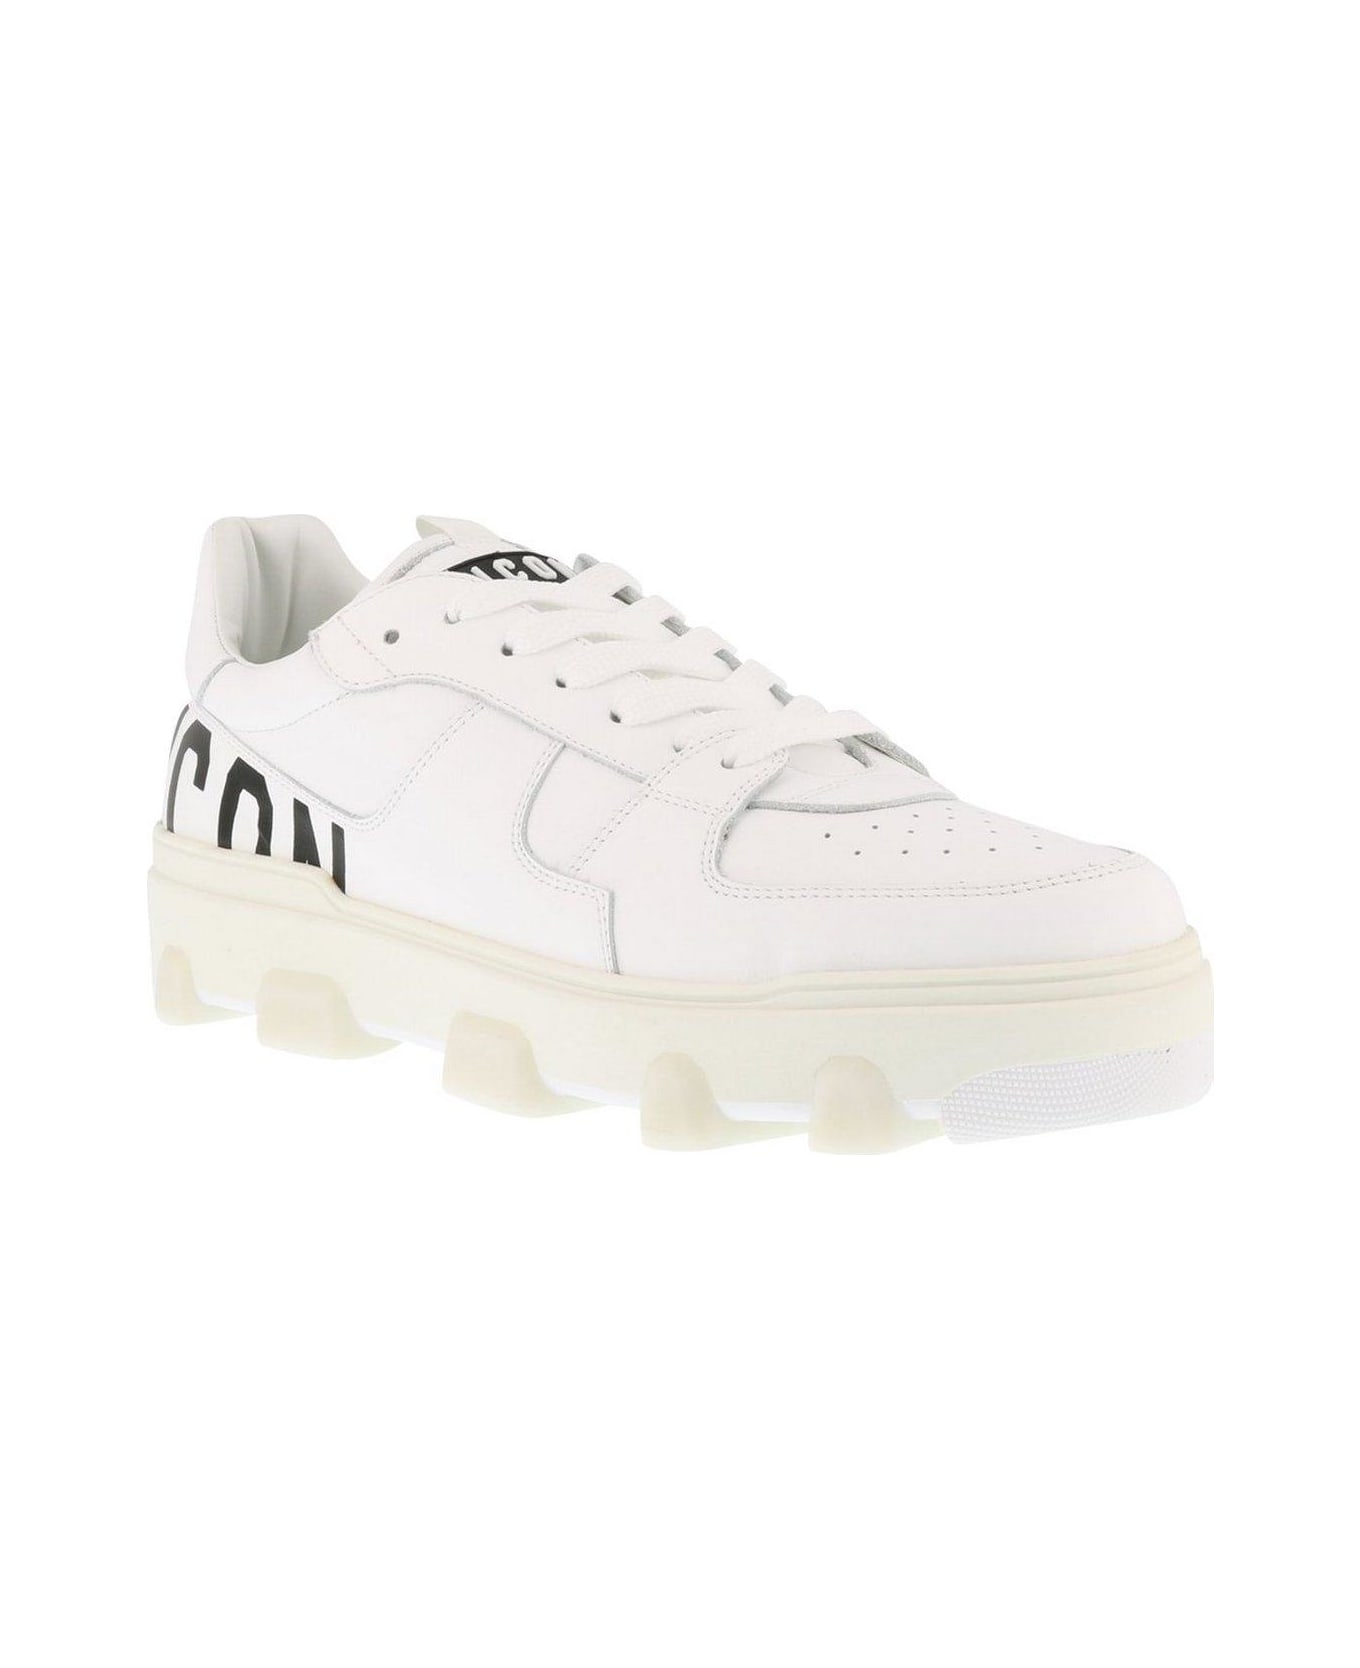 Dsquared2 Logo Printed Low-top Sneakers - White